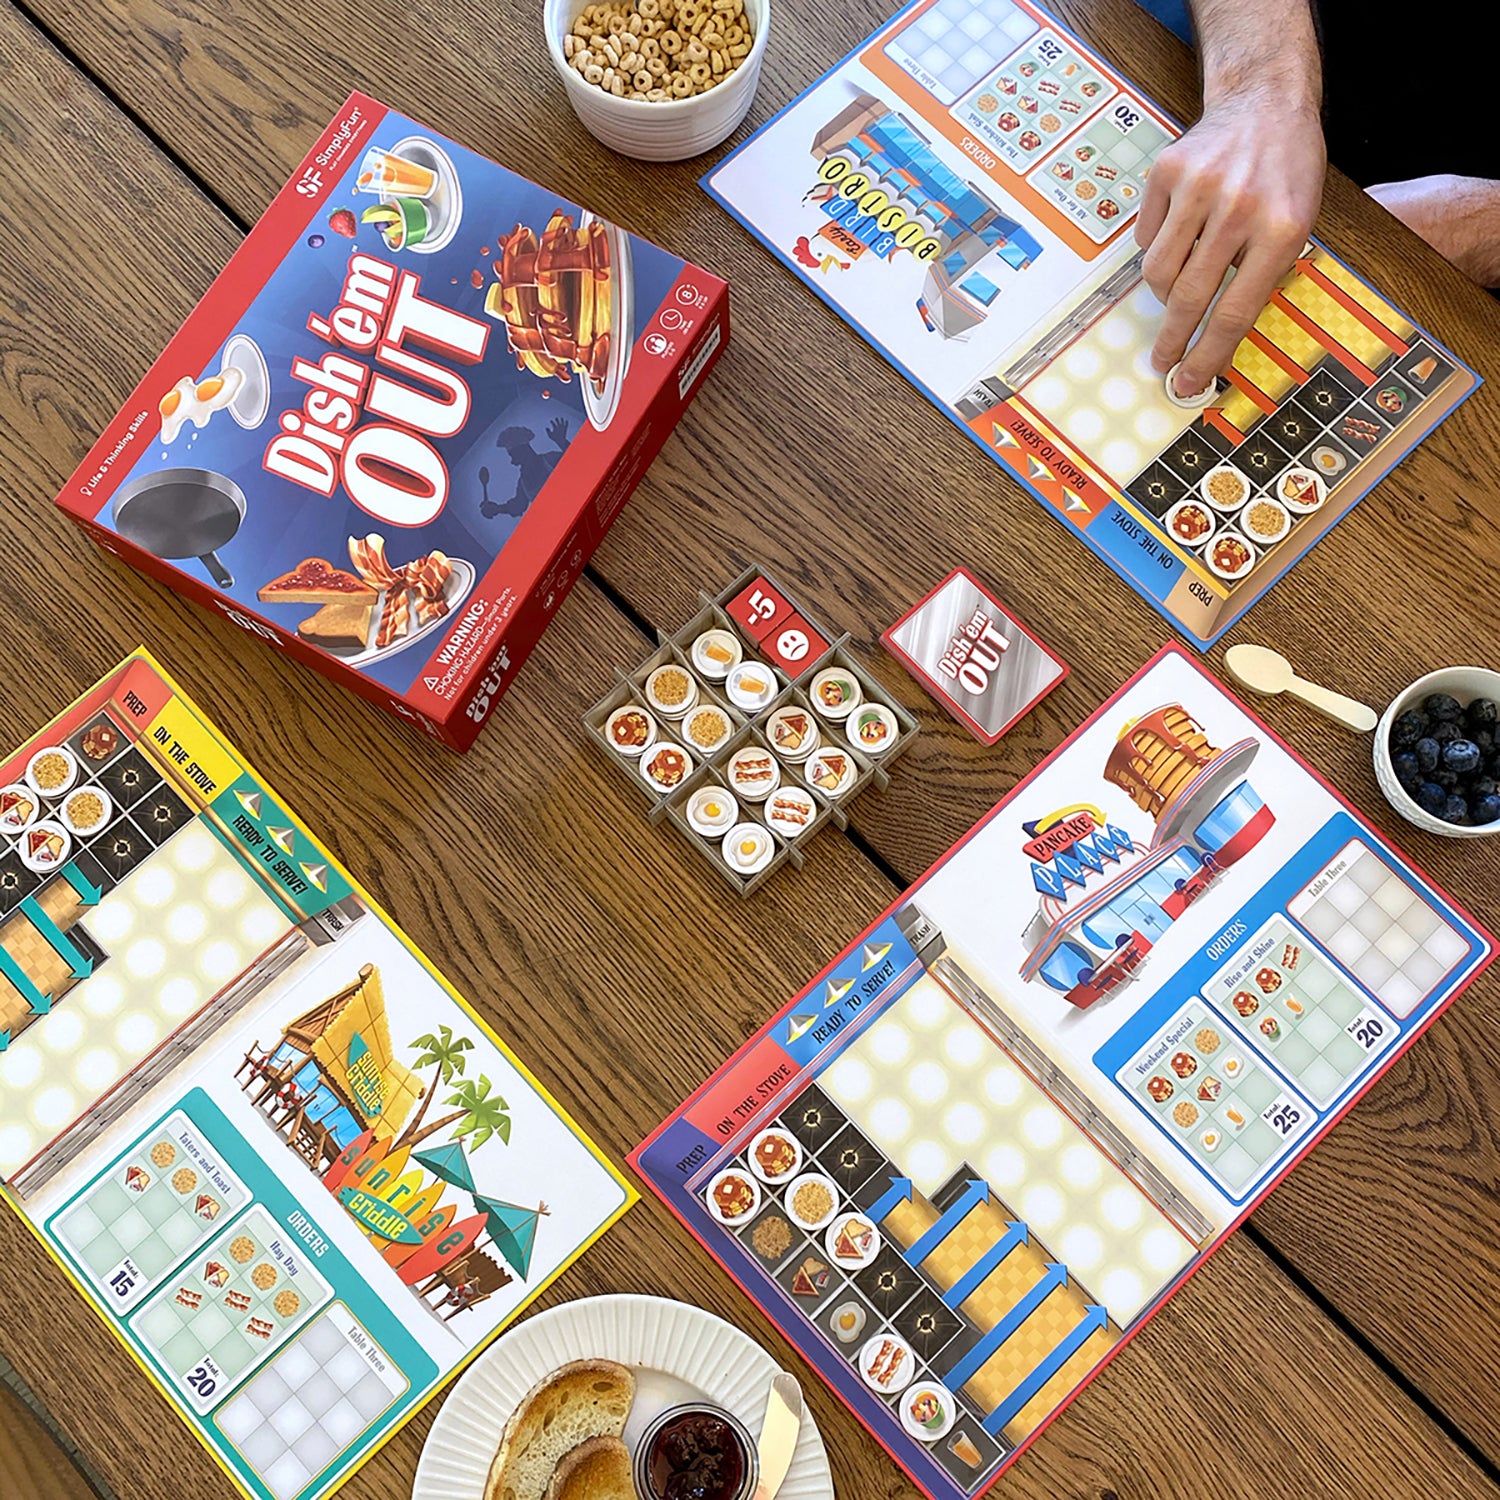 Dish 'em Out by SimplyFun is a fun restaurant and diner strategy game for ages 8 and up